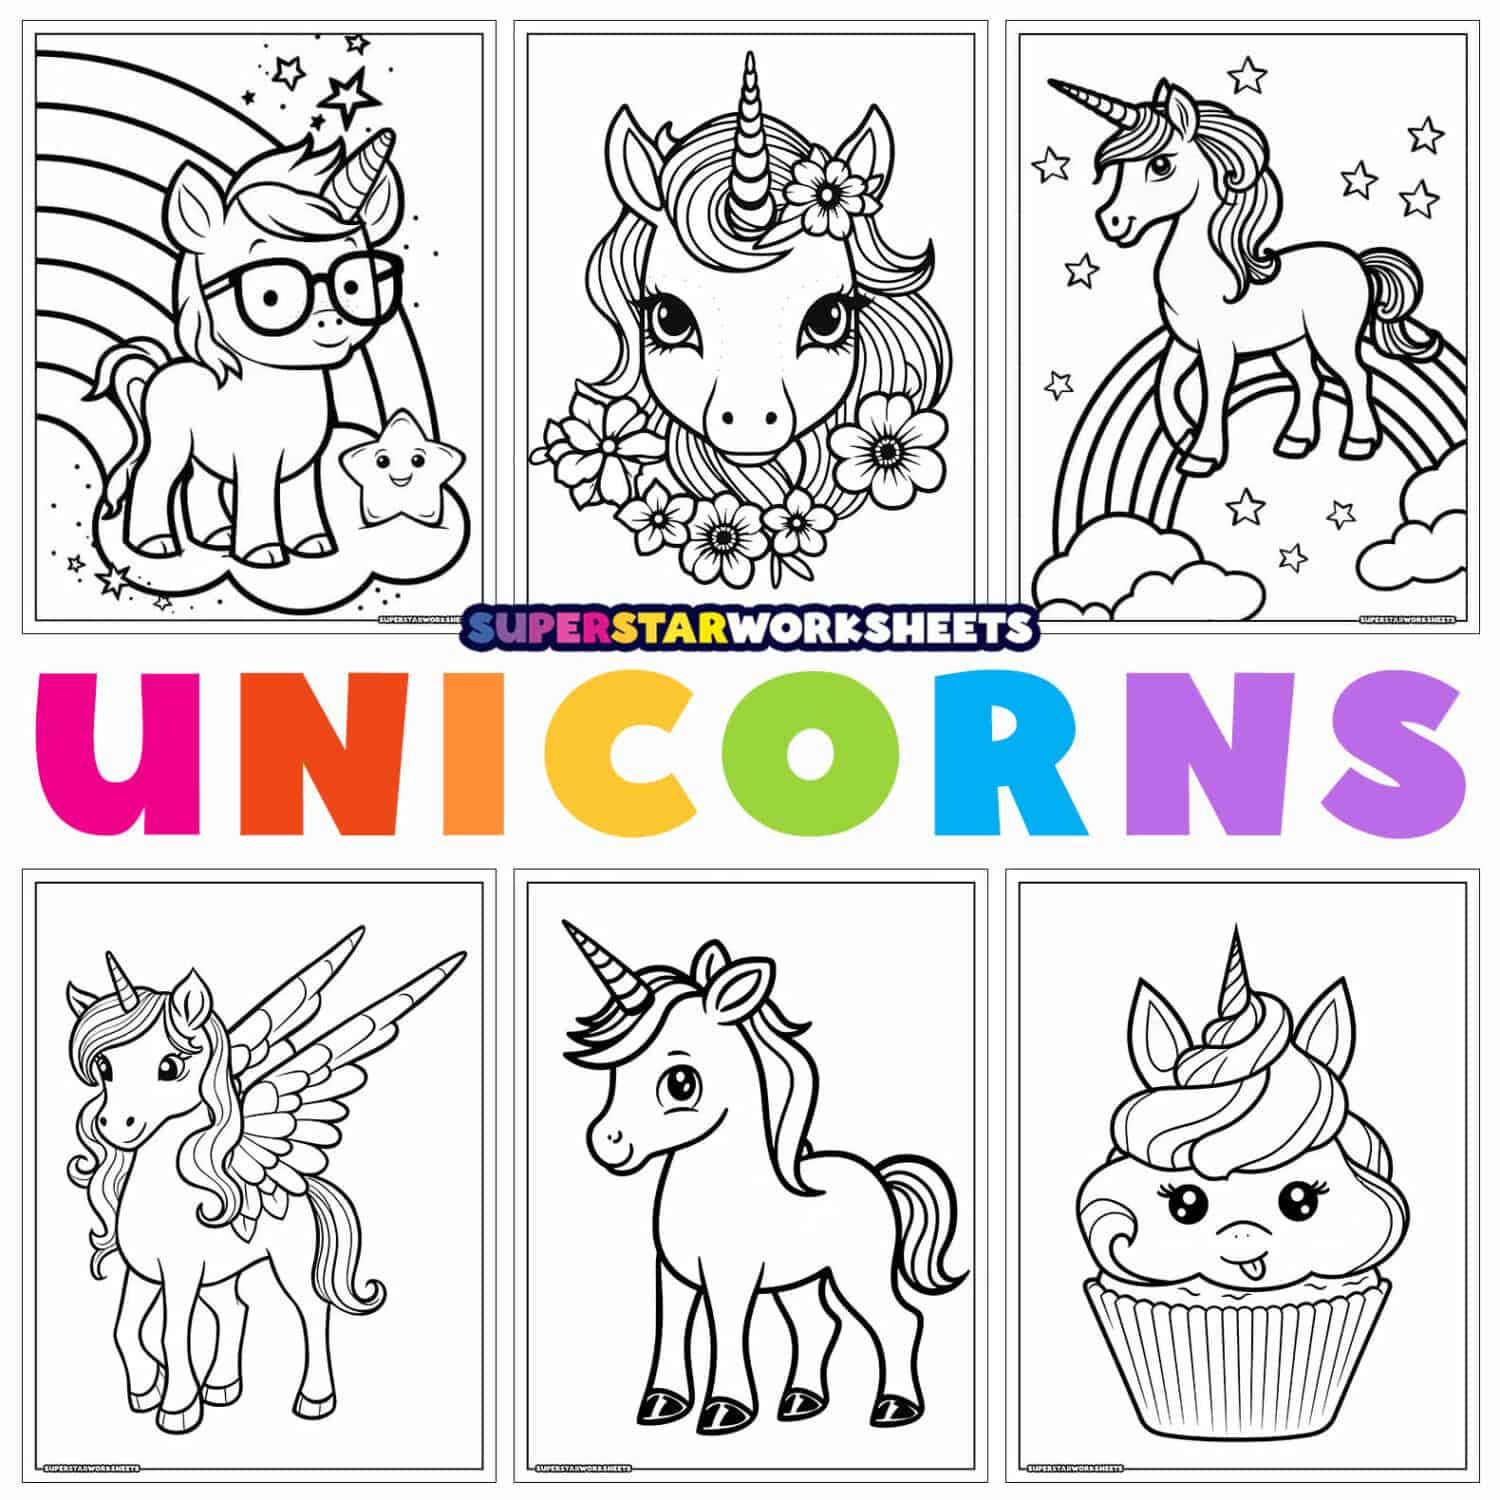  I Am Powerful: Cute Unicorn Themed Sketchbook for